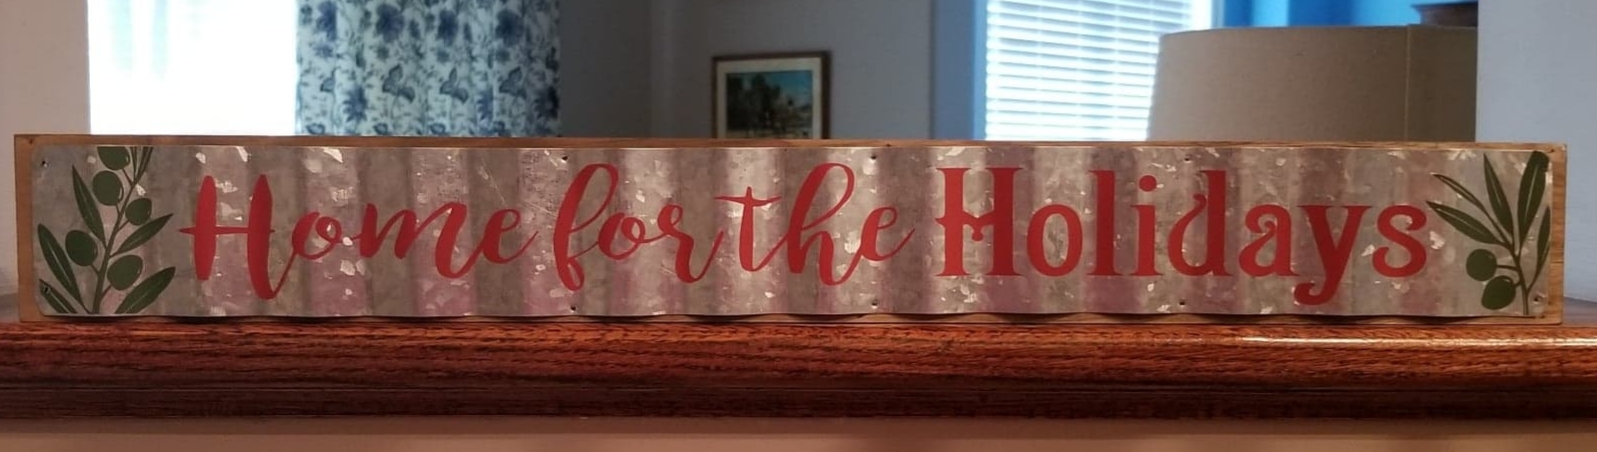 "Home for the Holidays" Wood Banner